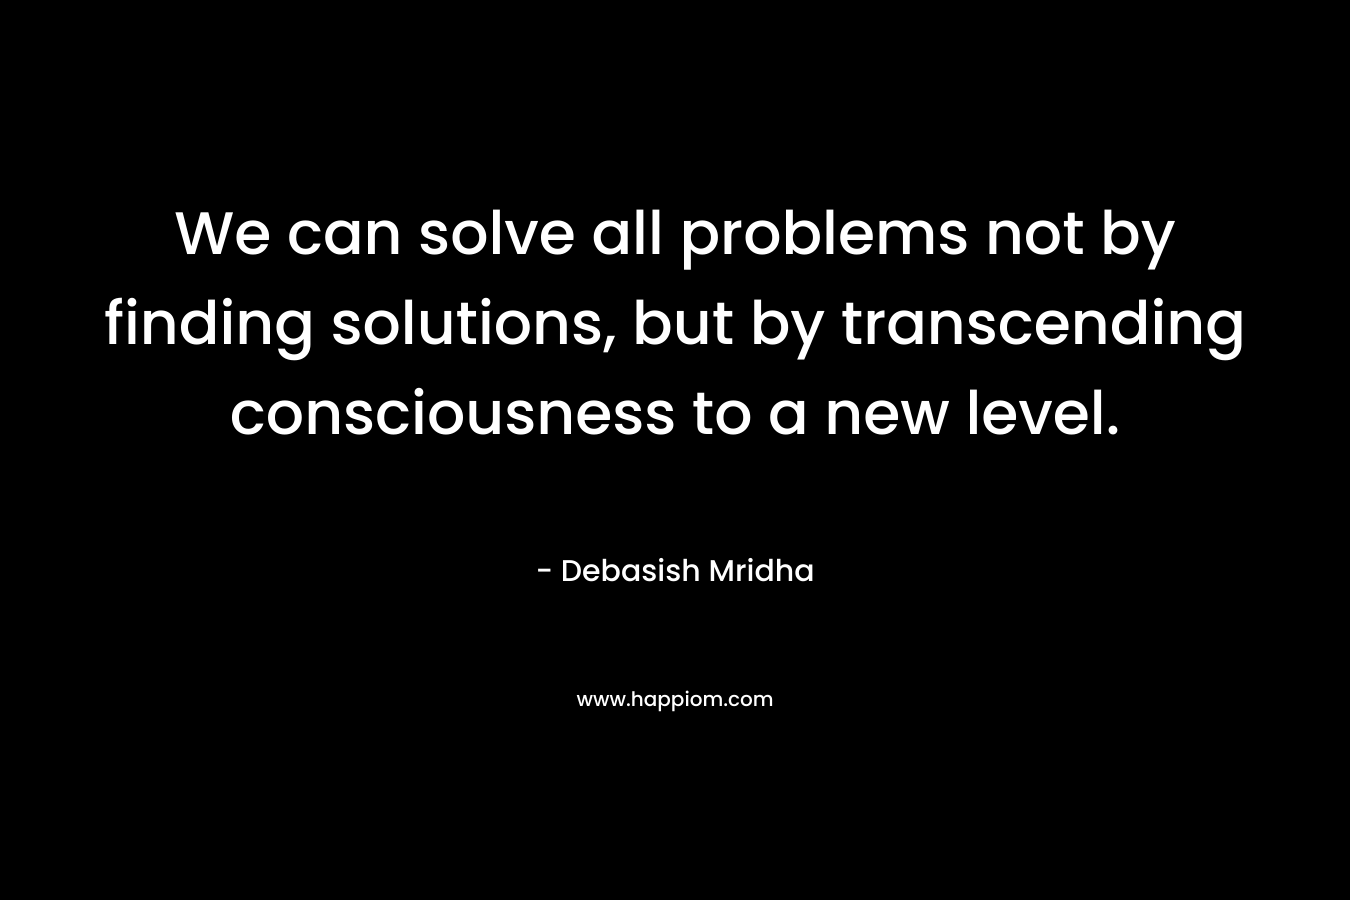 We can solve all problems not by finding solutions, but by transcending consciousness to a new level. – Debasish Mridha